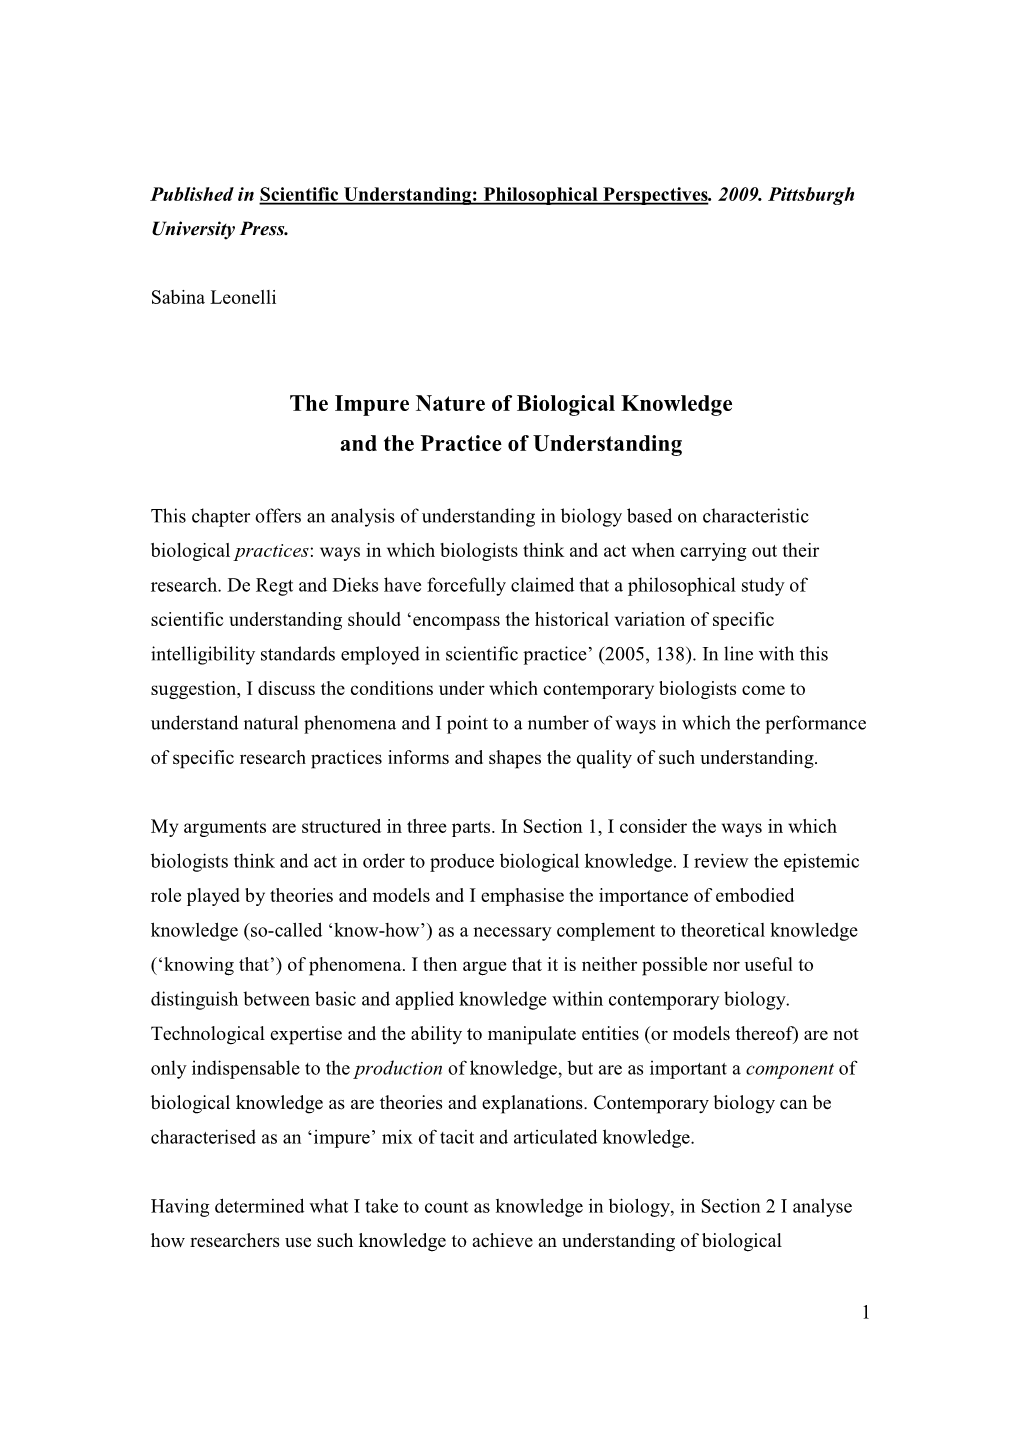 The Impure Nature of Biological Knowledge and the Practice of Understanding